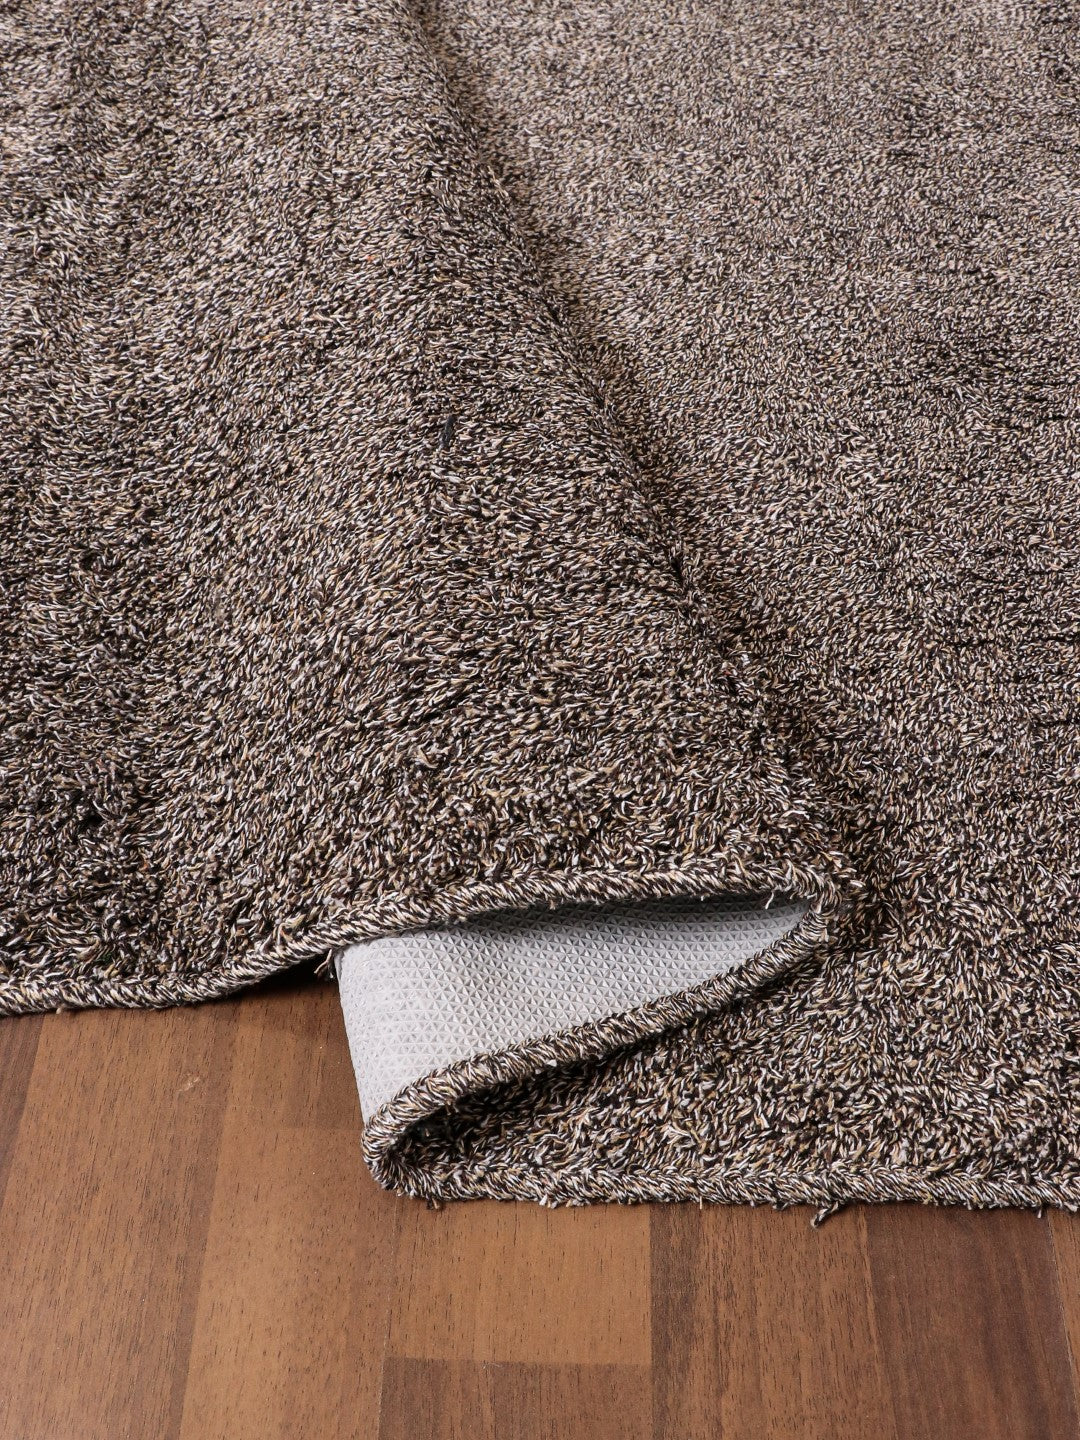 Dark Brown Fancy Cotton Shaggy Rectangle Soft and Thick Rug with TPR Backing